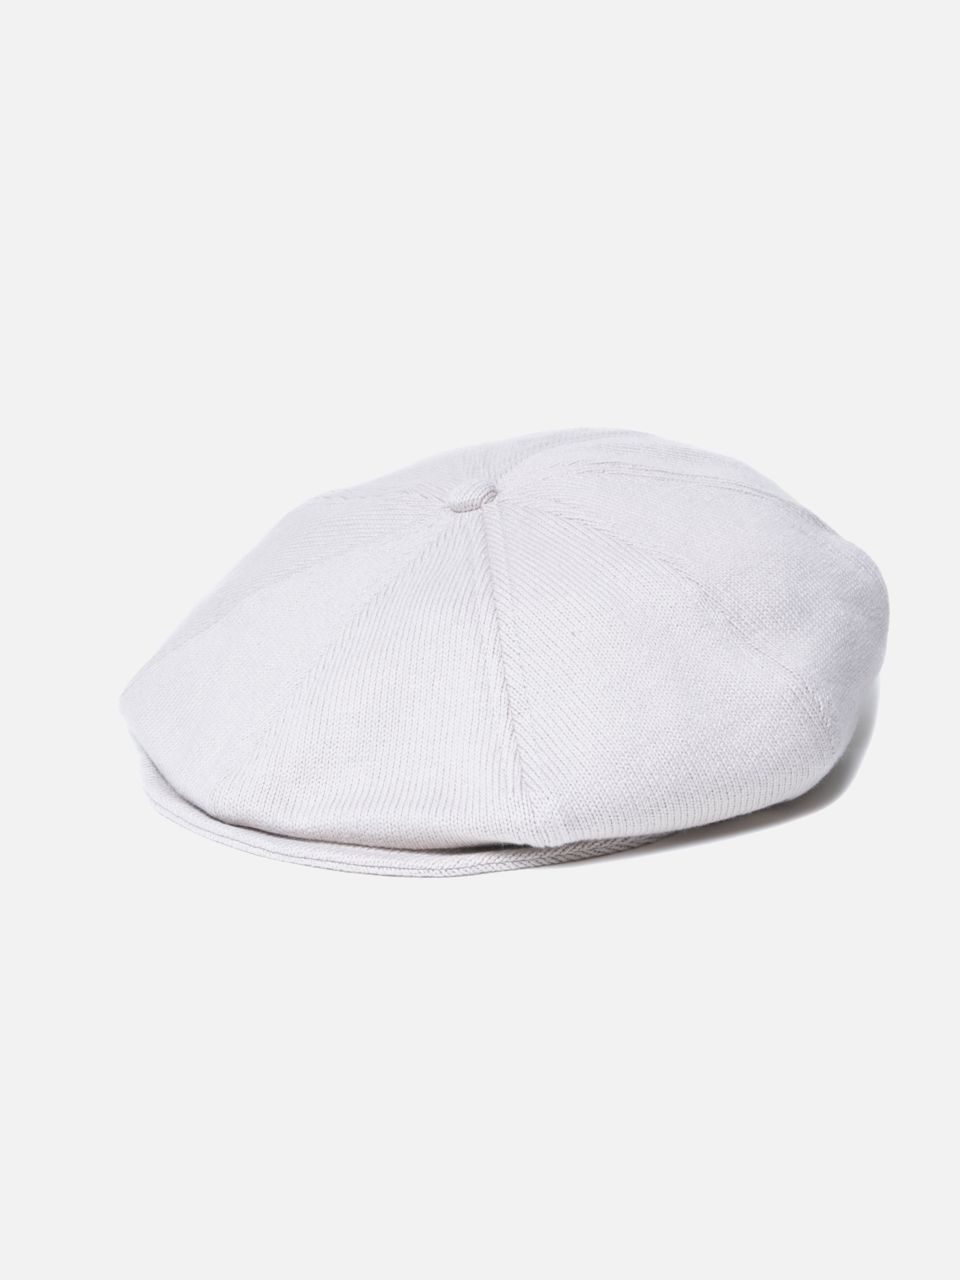 COOTIE クーティ 通販 20SS Knit Casquette